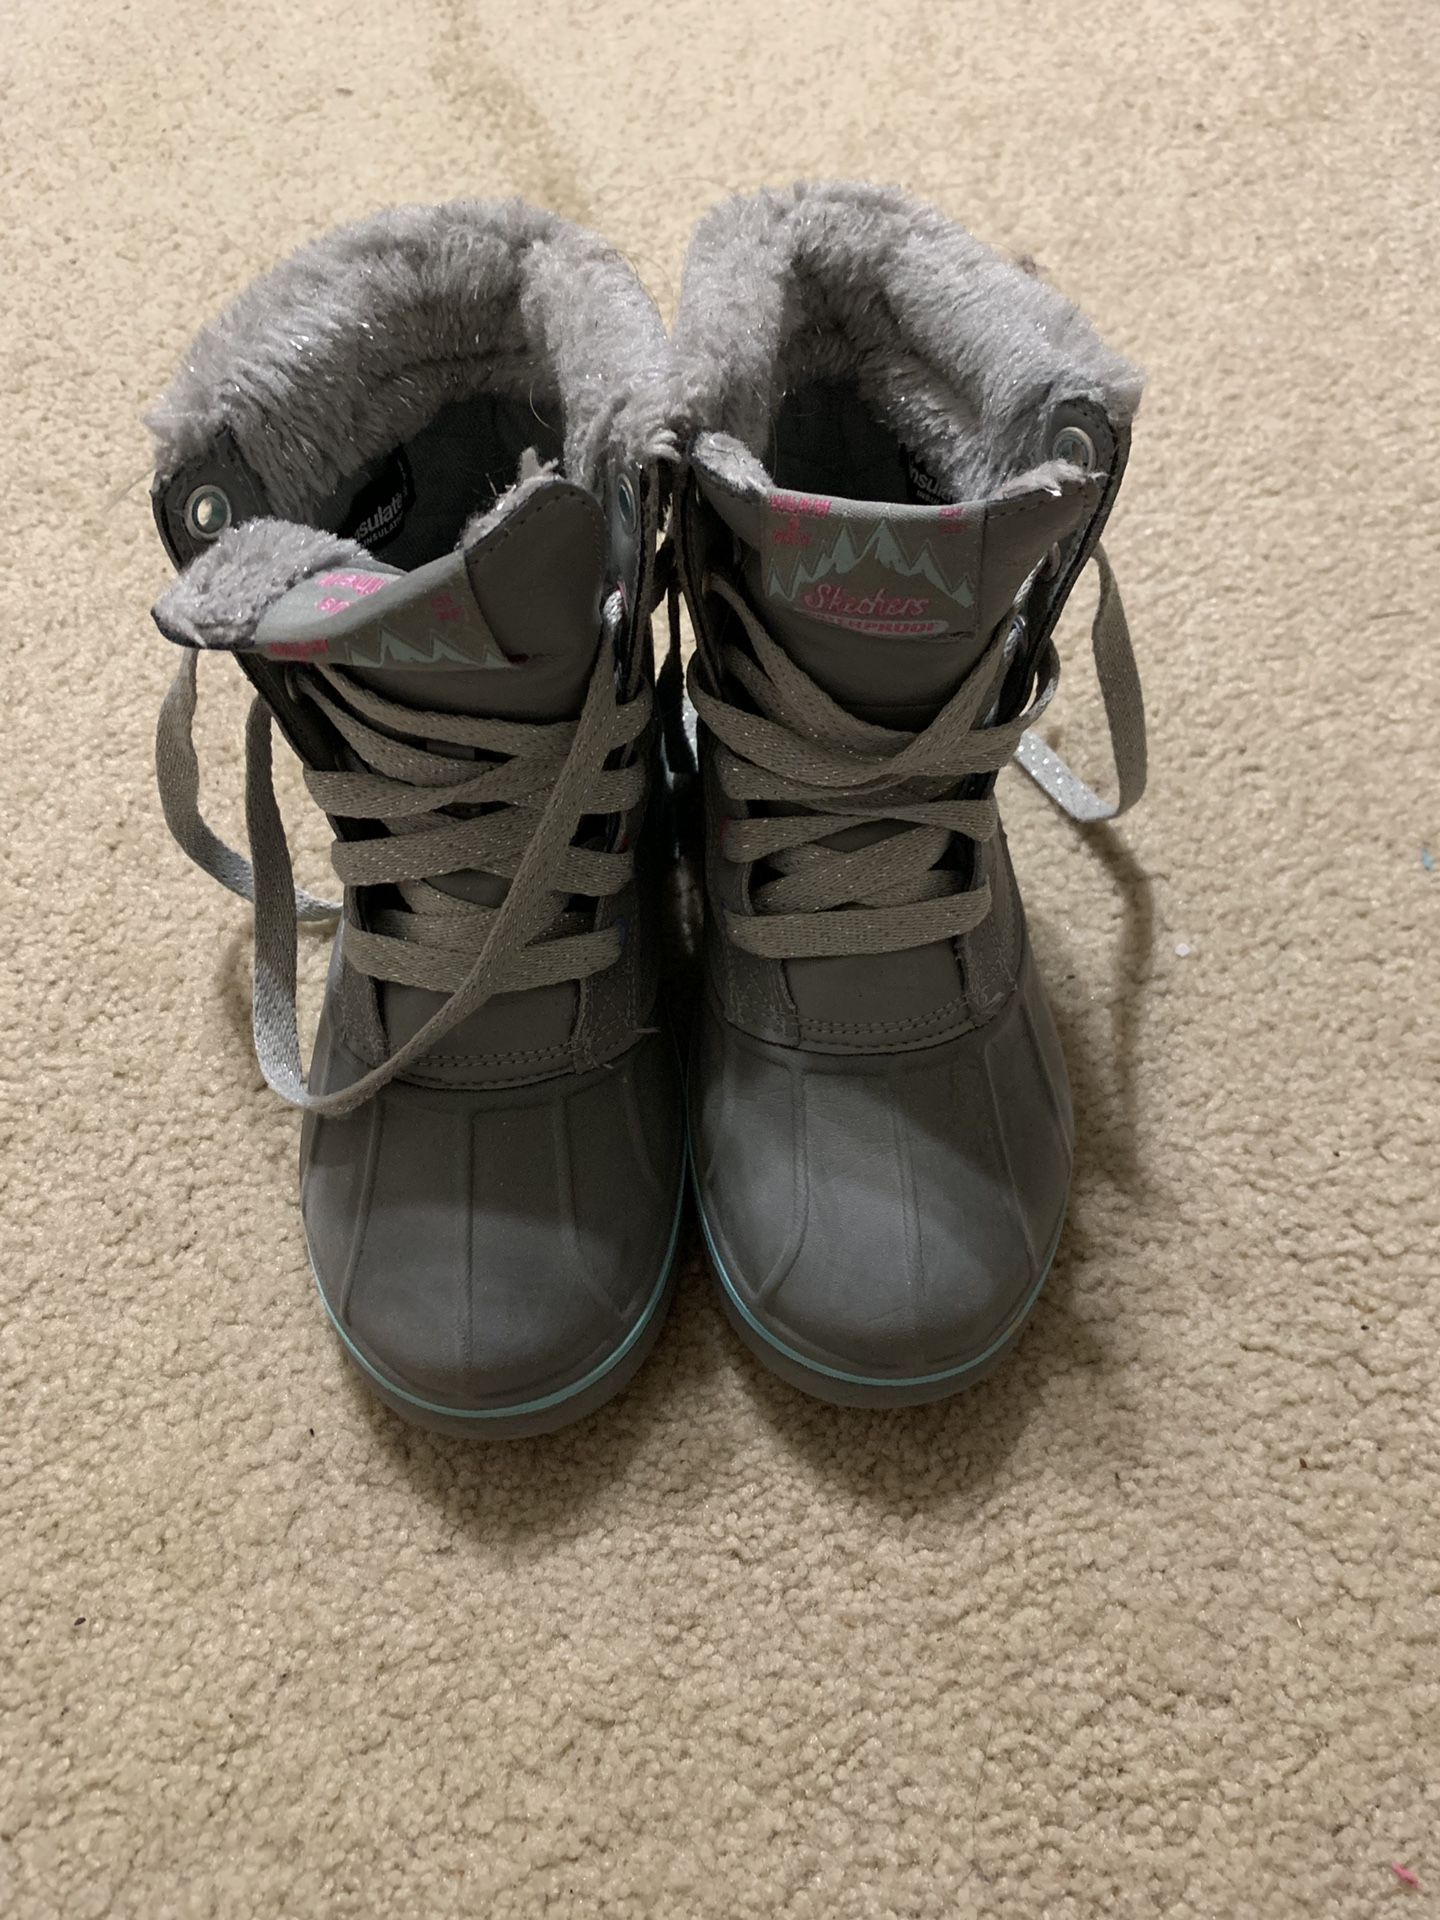 Sketchers Snow boots for girls- Size 1